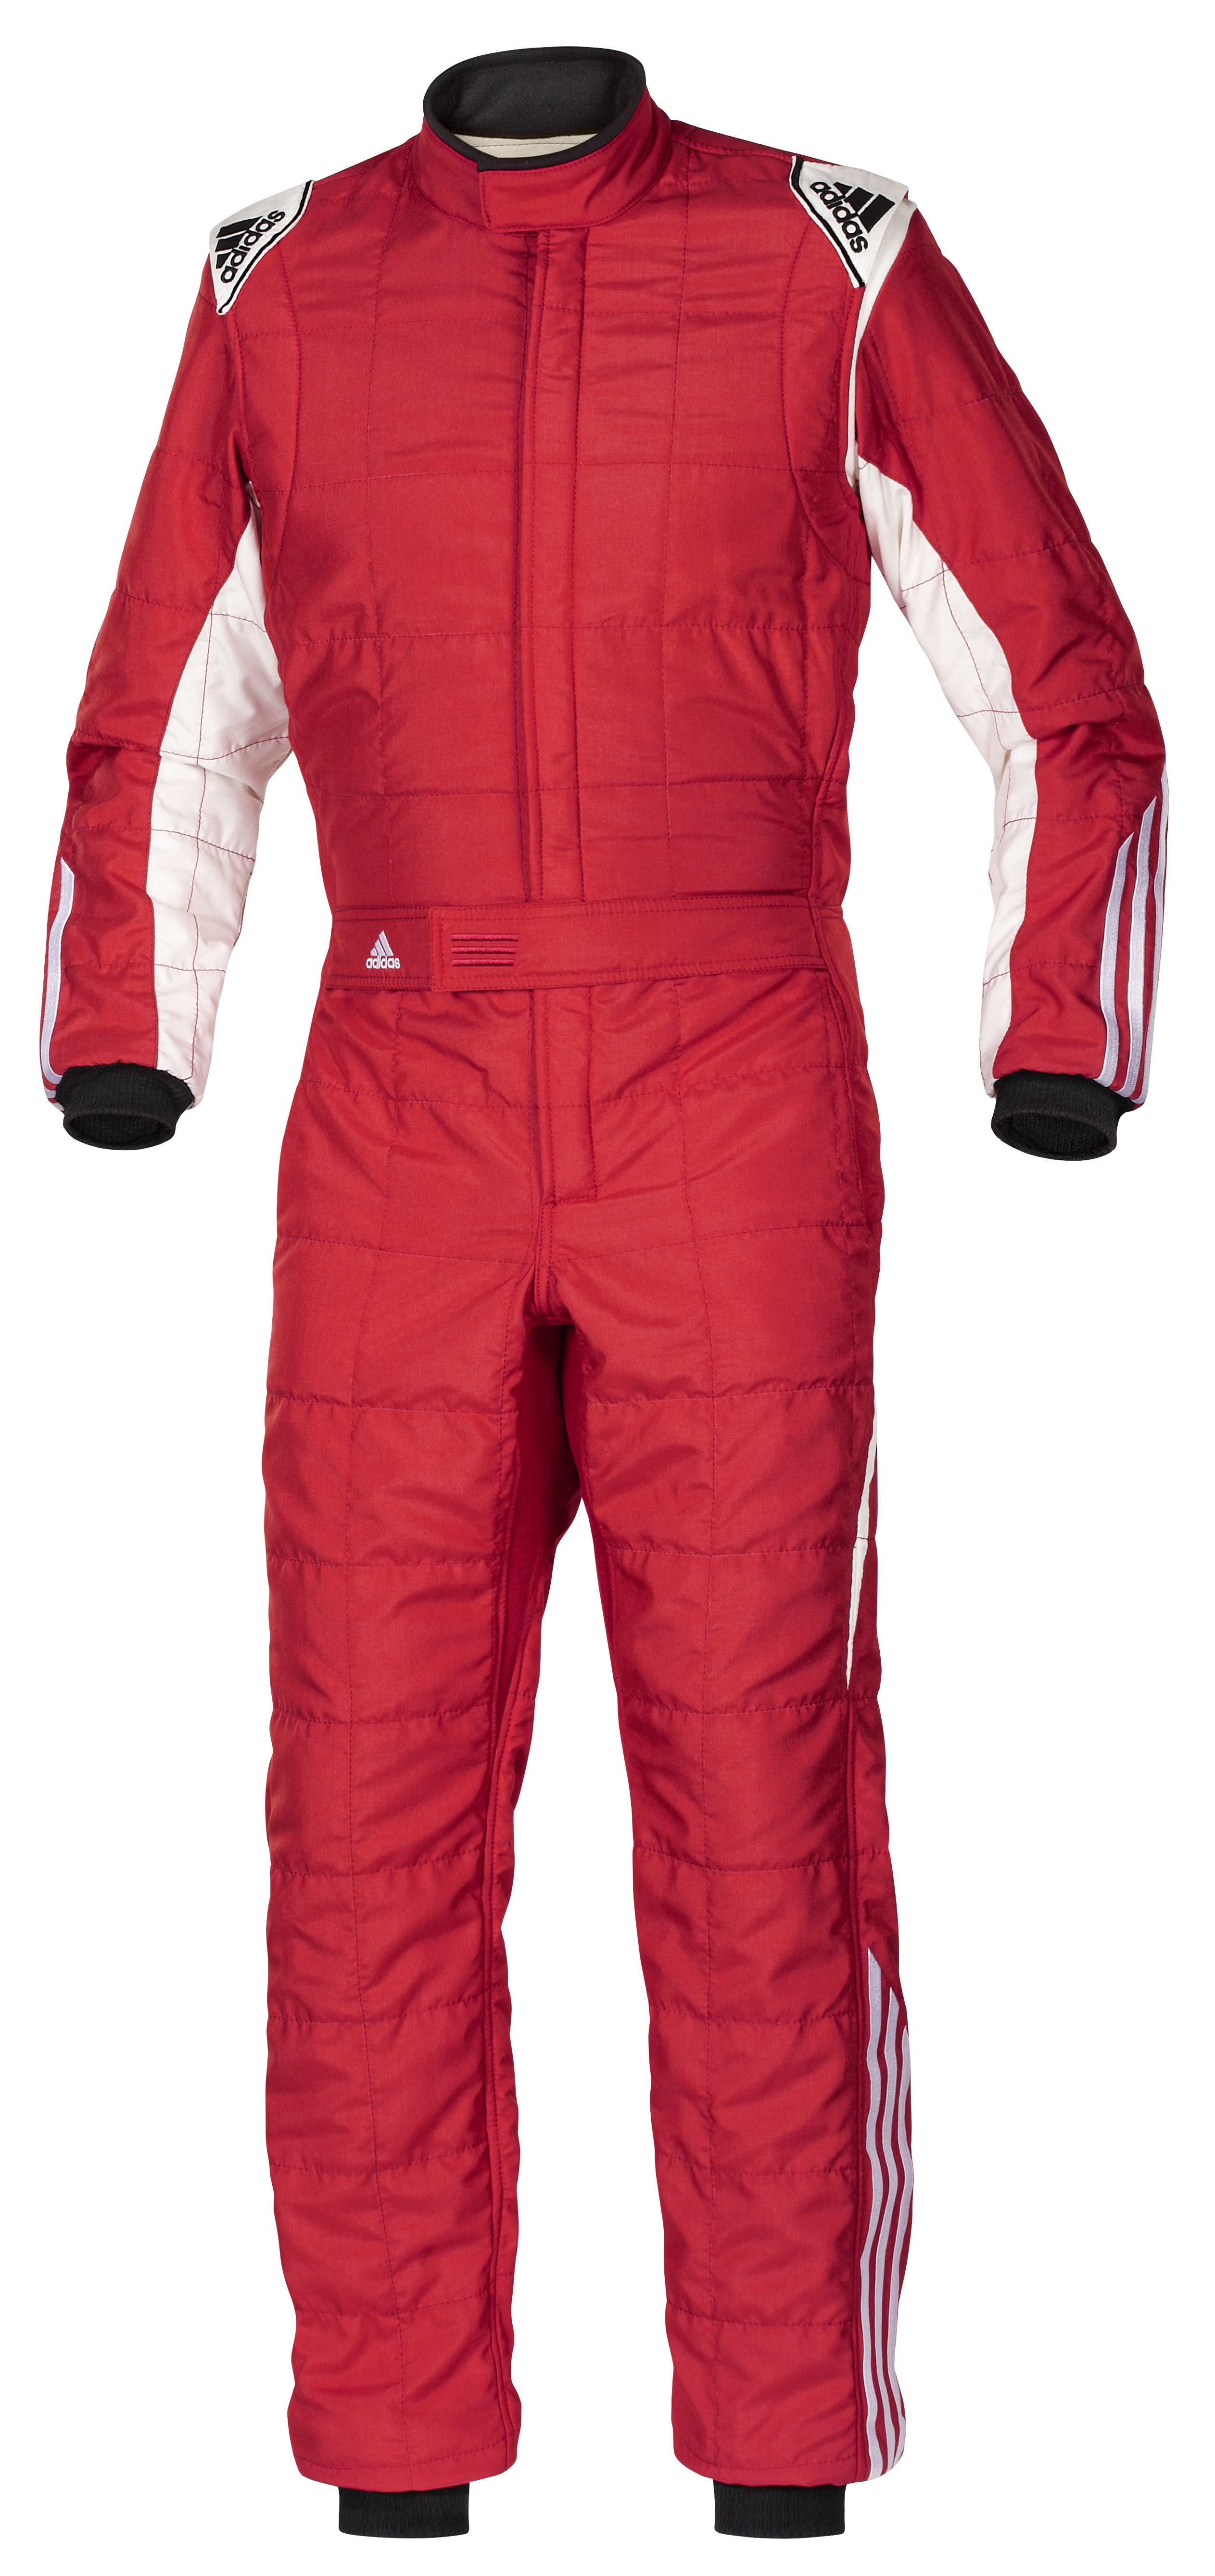 adidas CLIMACOOL NOMEX RACE SUIT RED/WHITE 50 SIZE